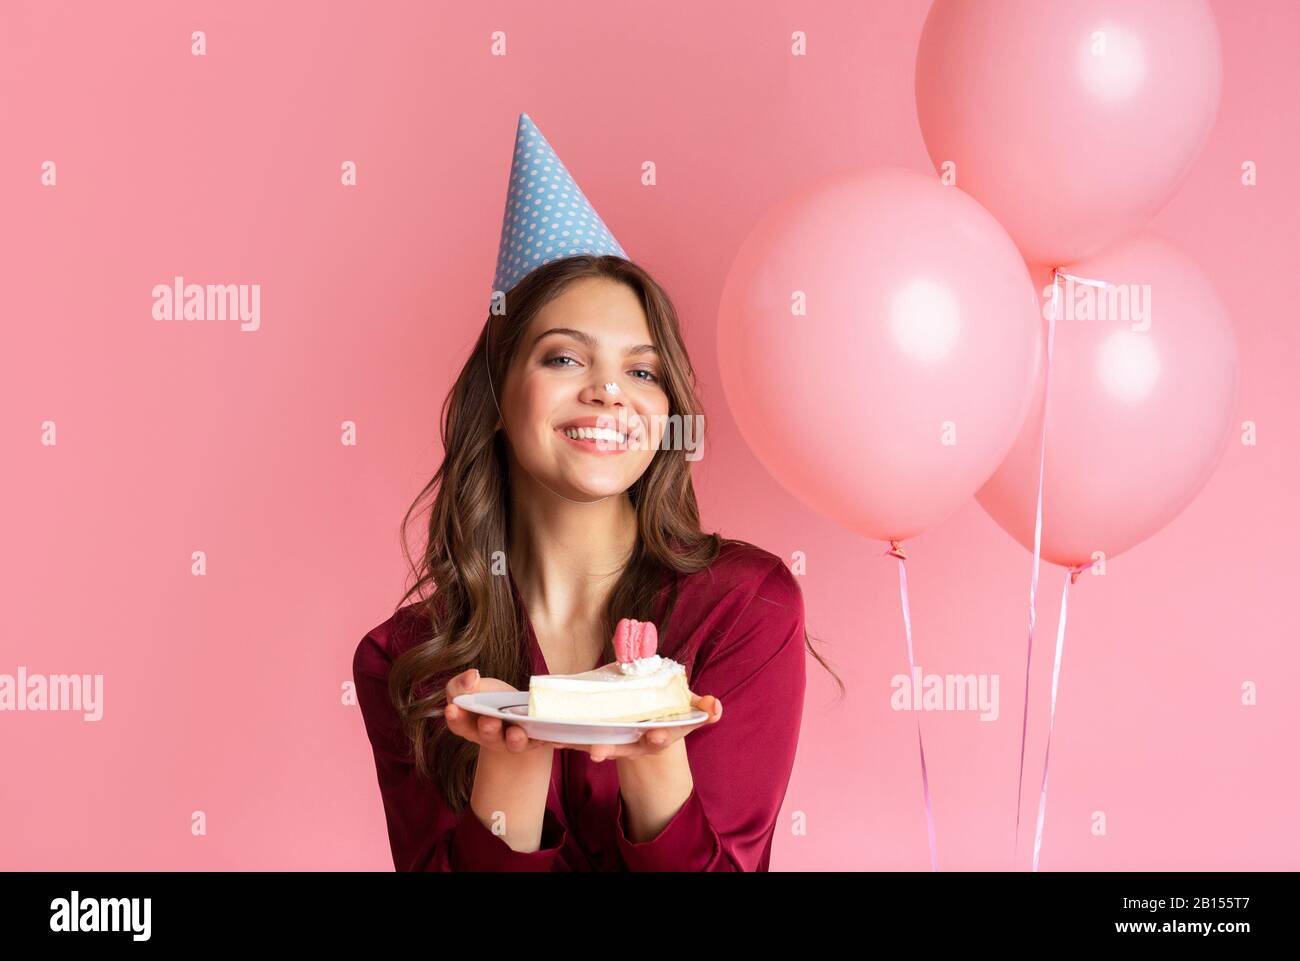 Cute Birthday Pictures | Birthday Photography